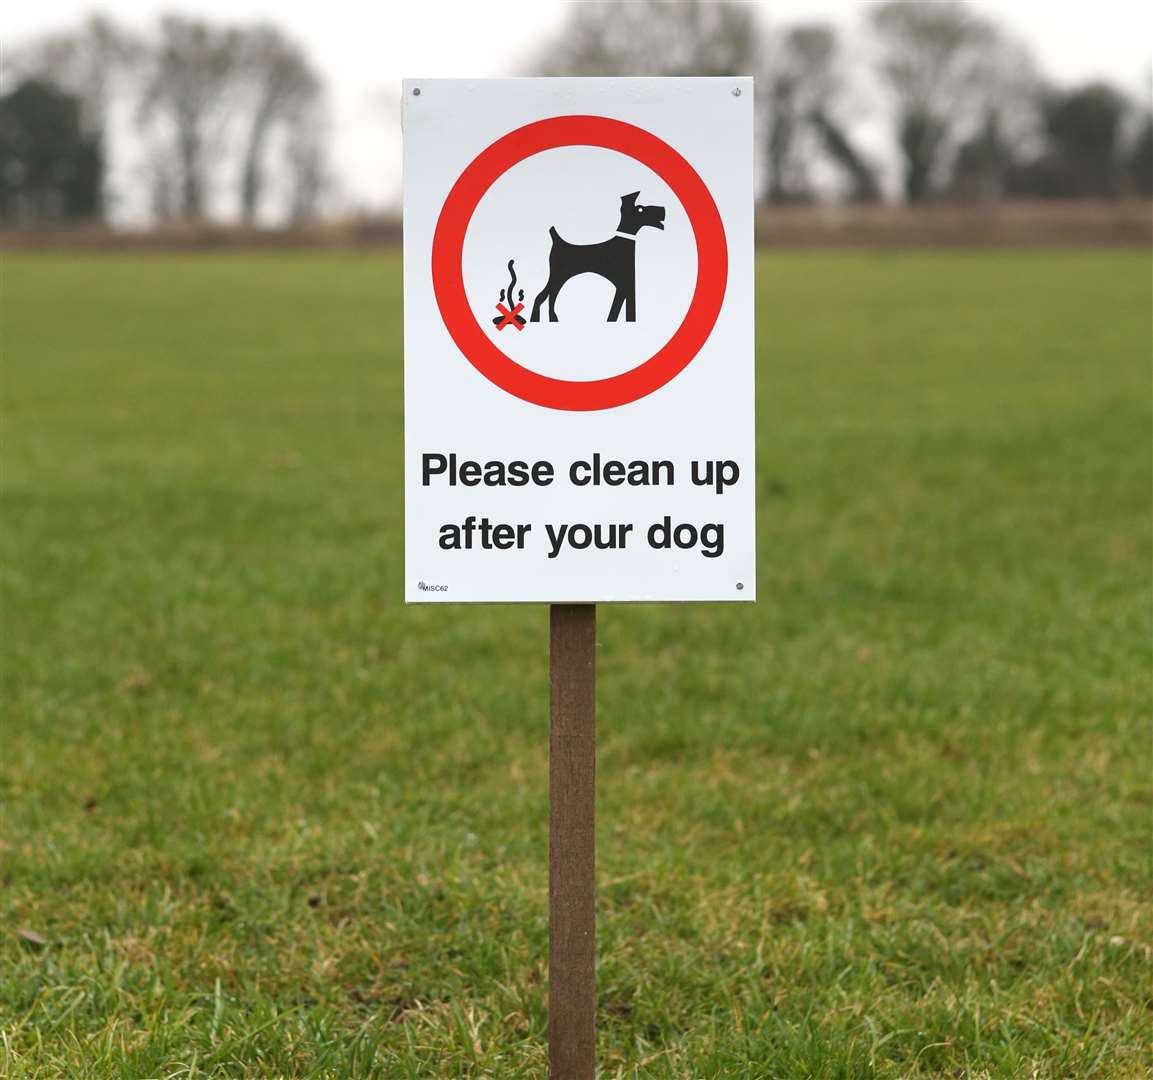 The wardens will also crack down on dog fouling. Pic: Richard Marsham